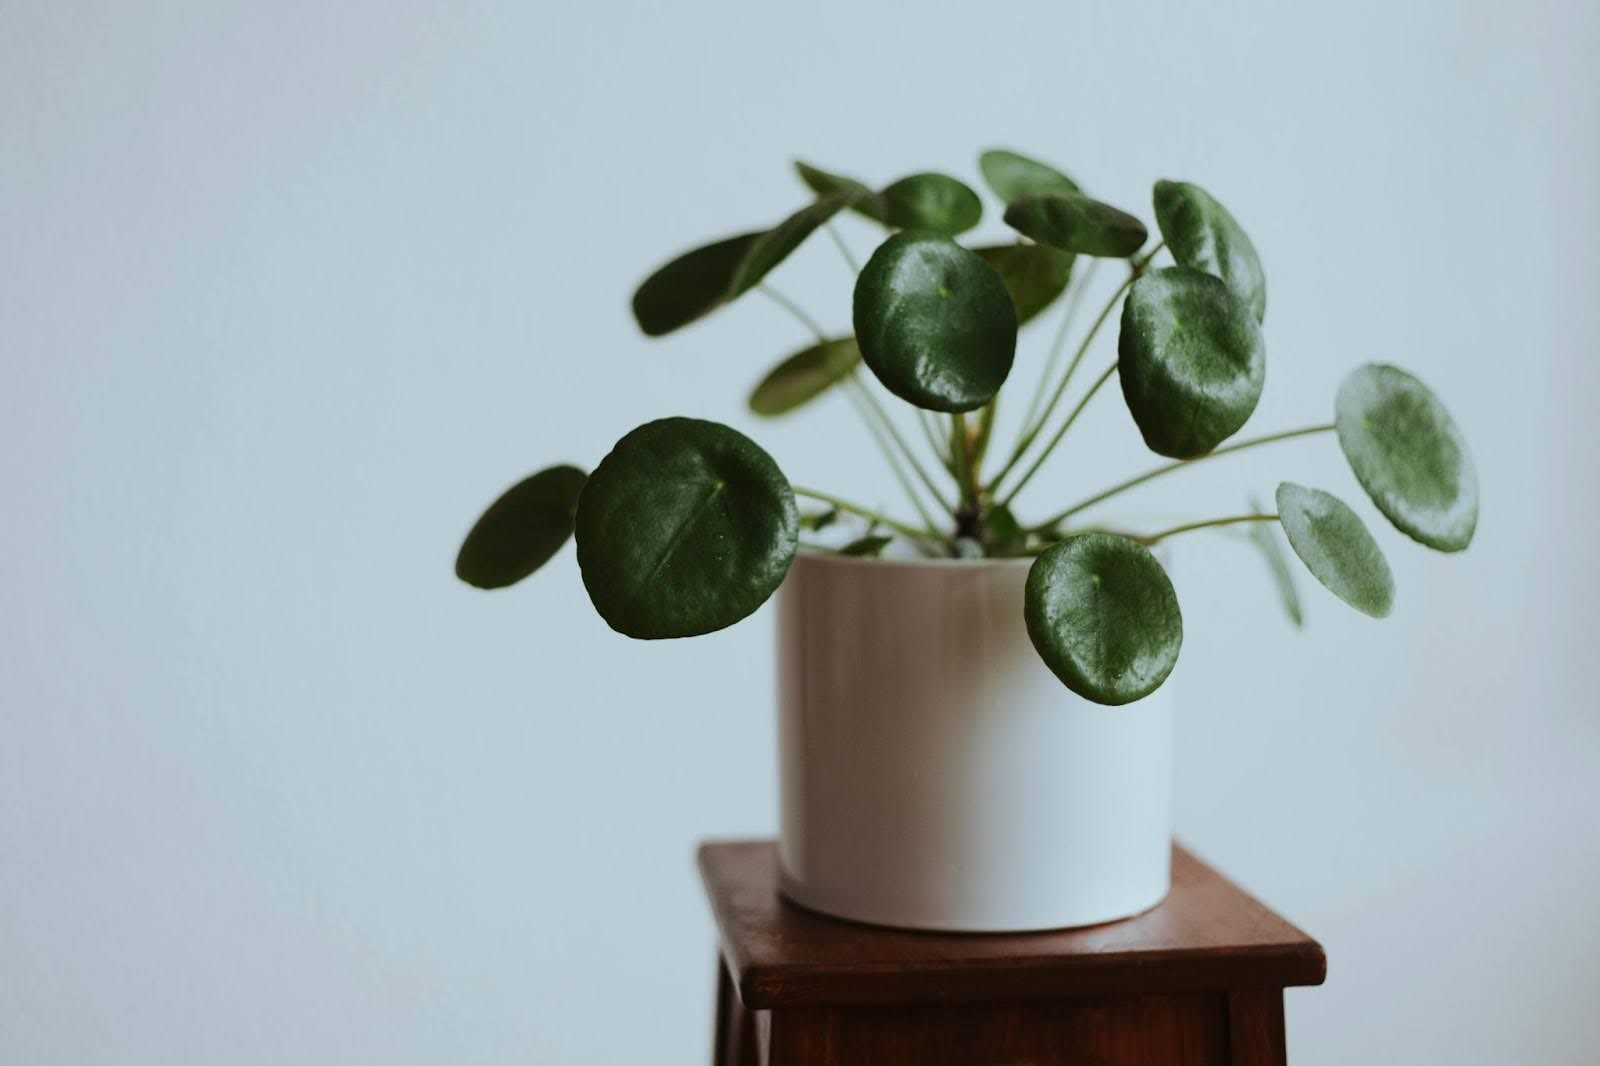 A potted plant is sitting on a wooden table.